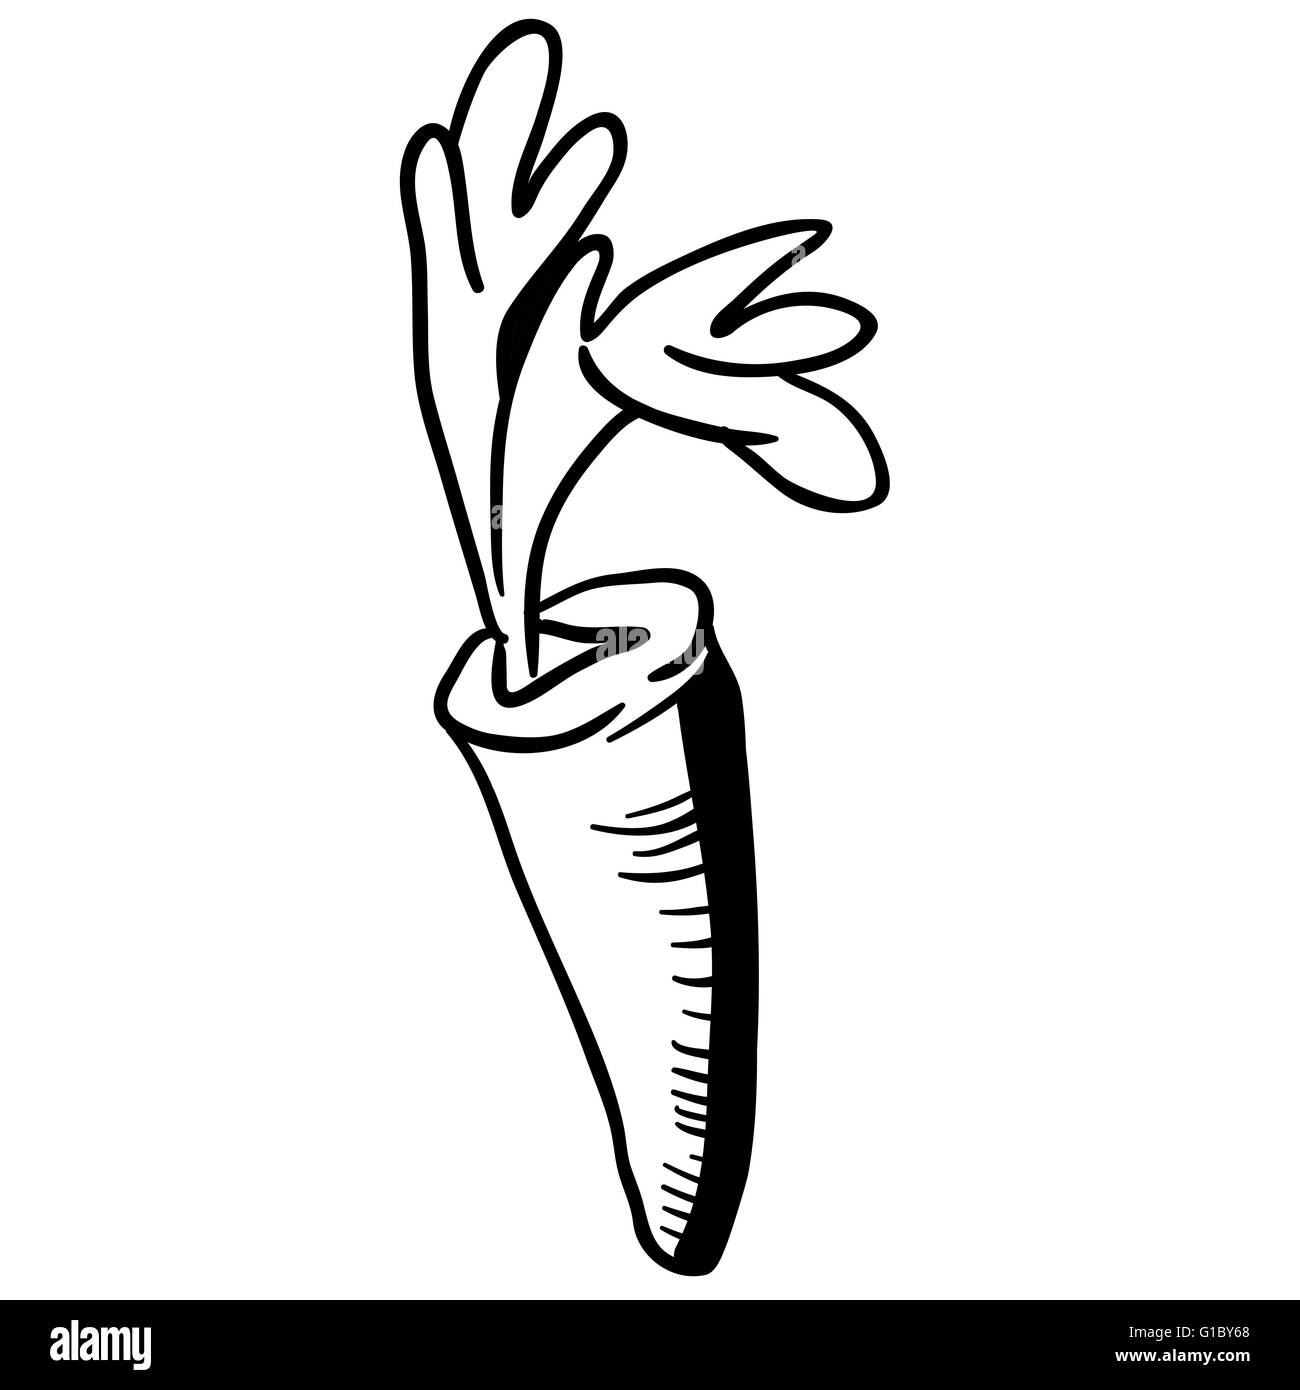 simple black and white carrot cartoon Stock Vector